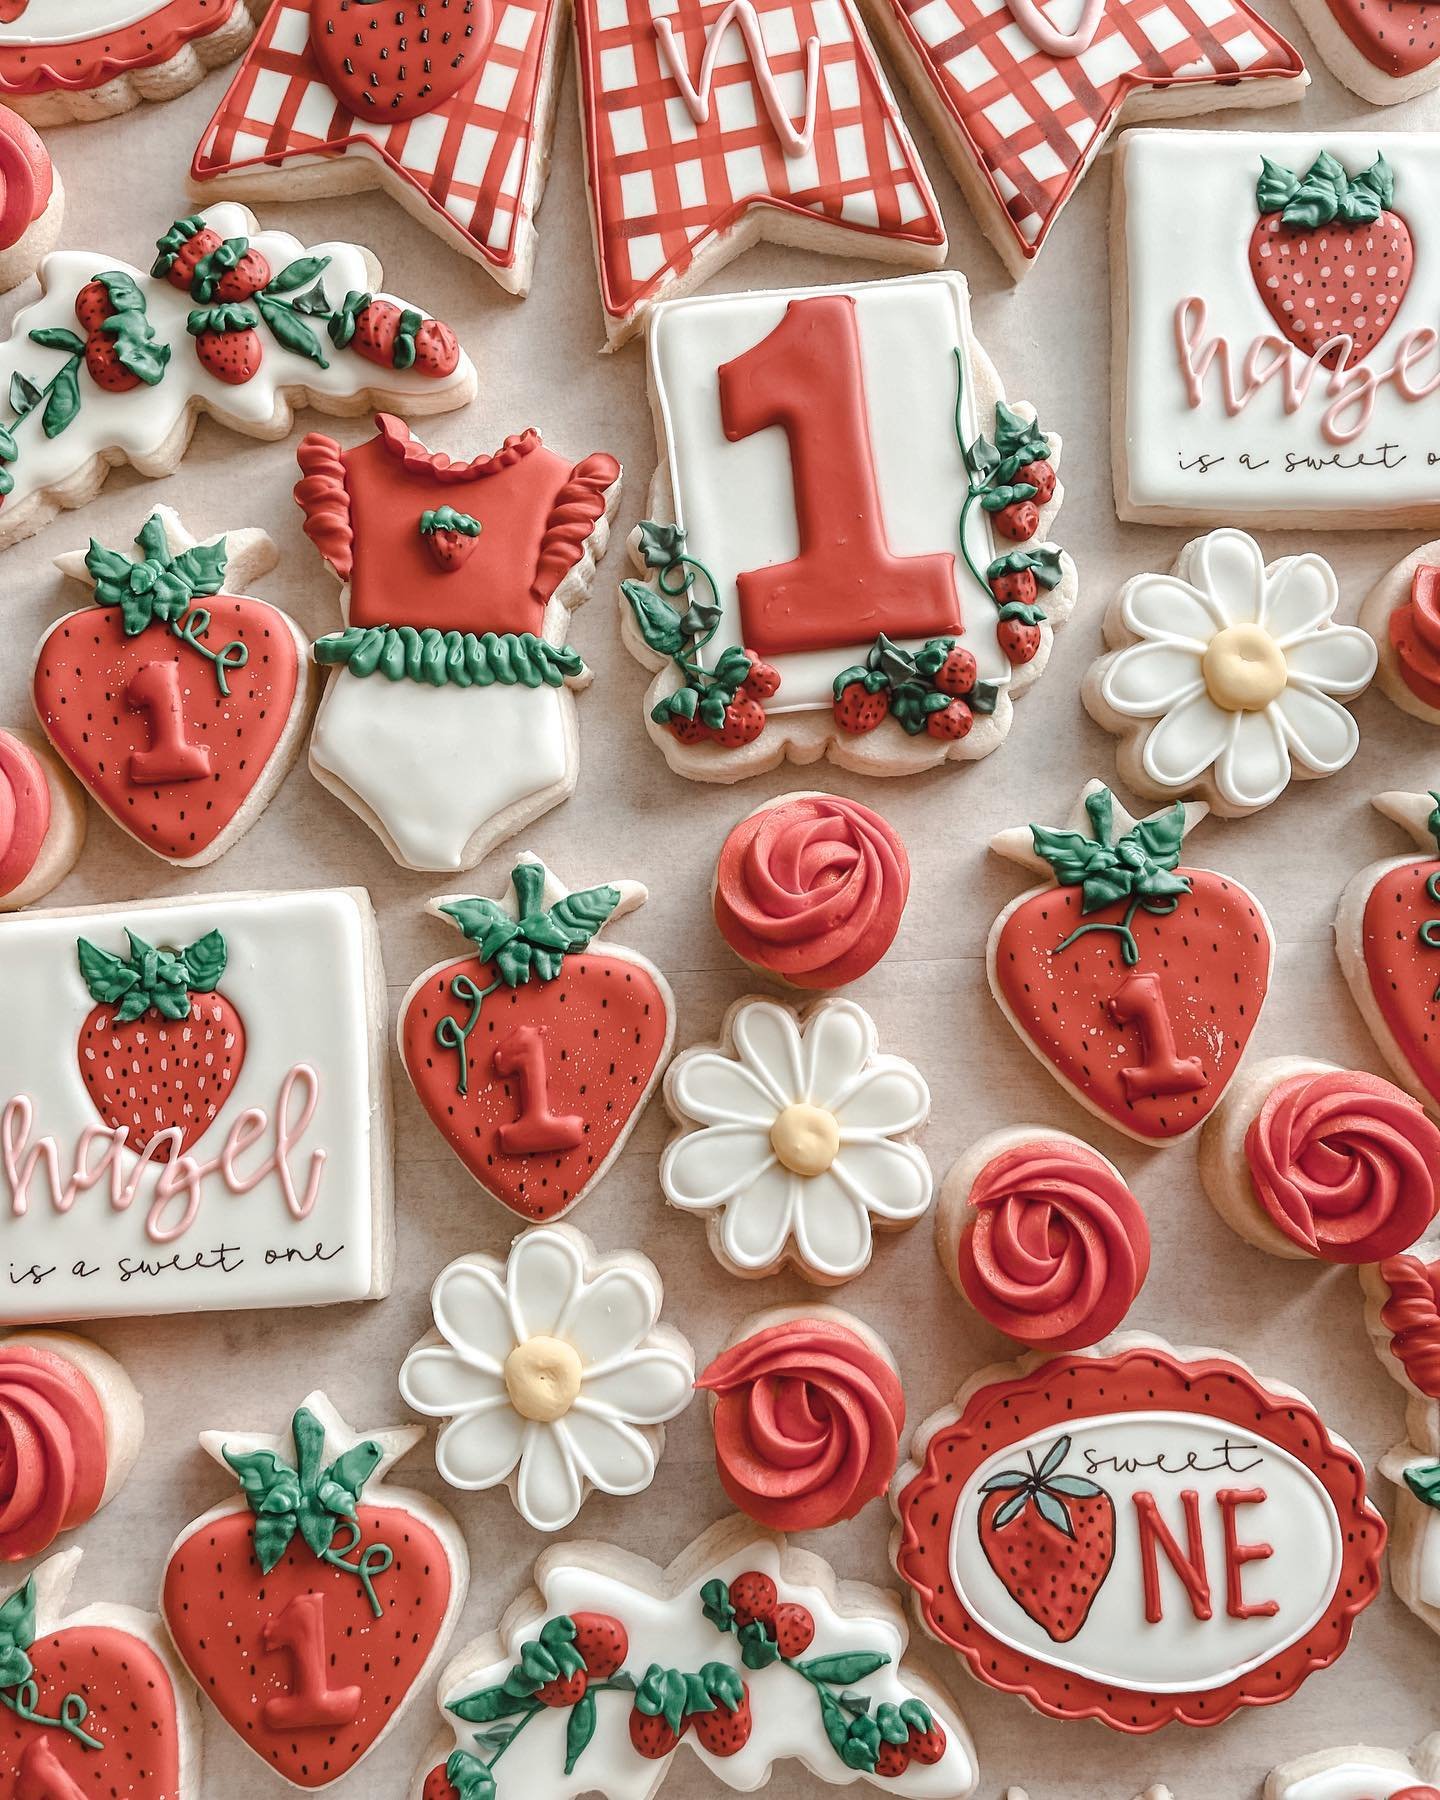 MH-Cookie-Shoppe-First-Birthday-Cookies-Strawberry-Theme-02.jpeg